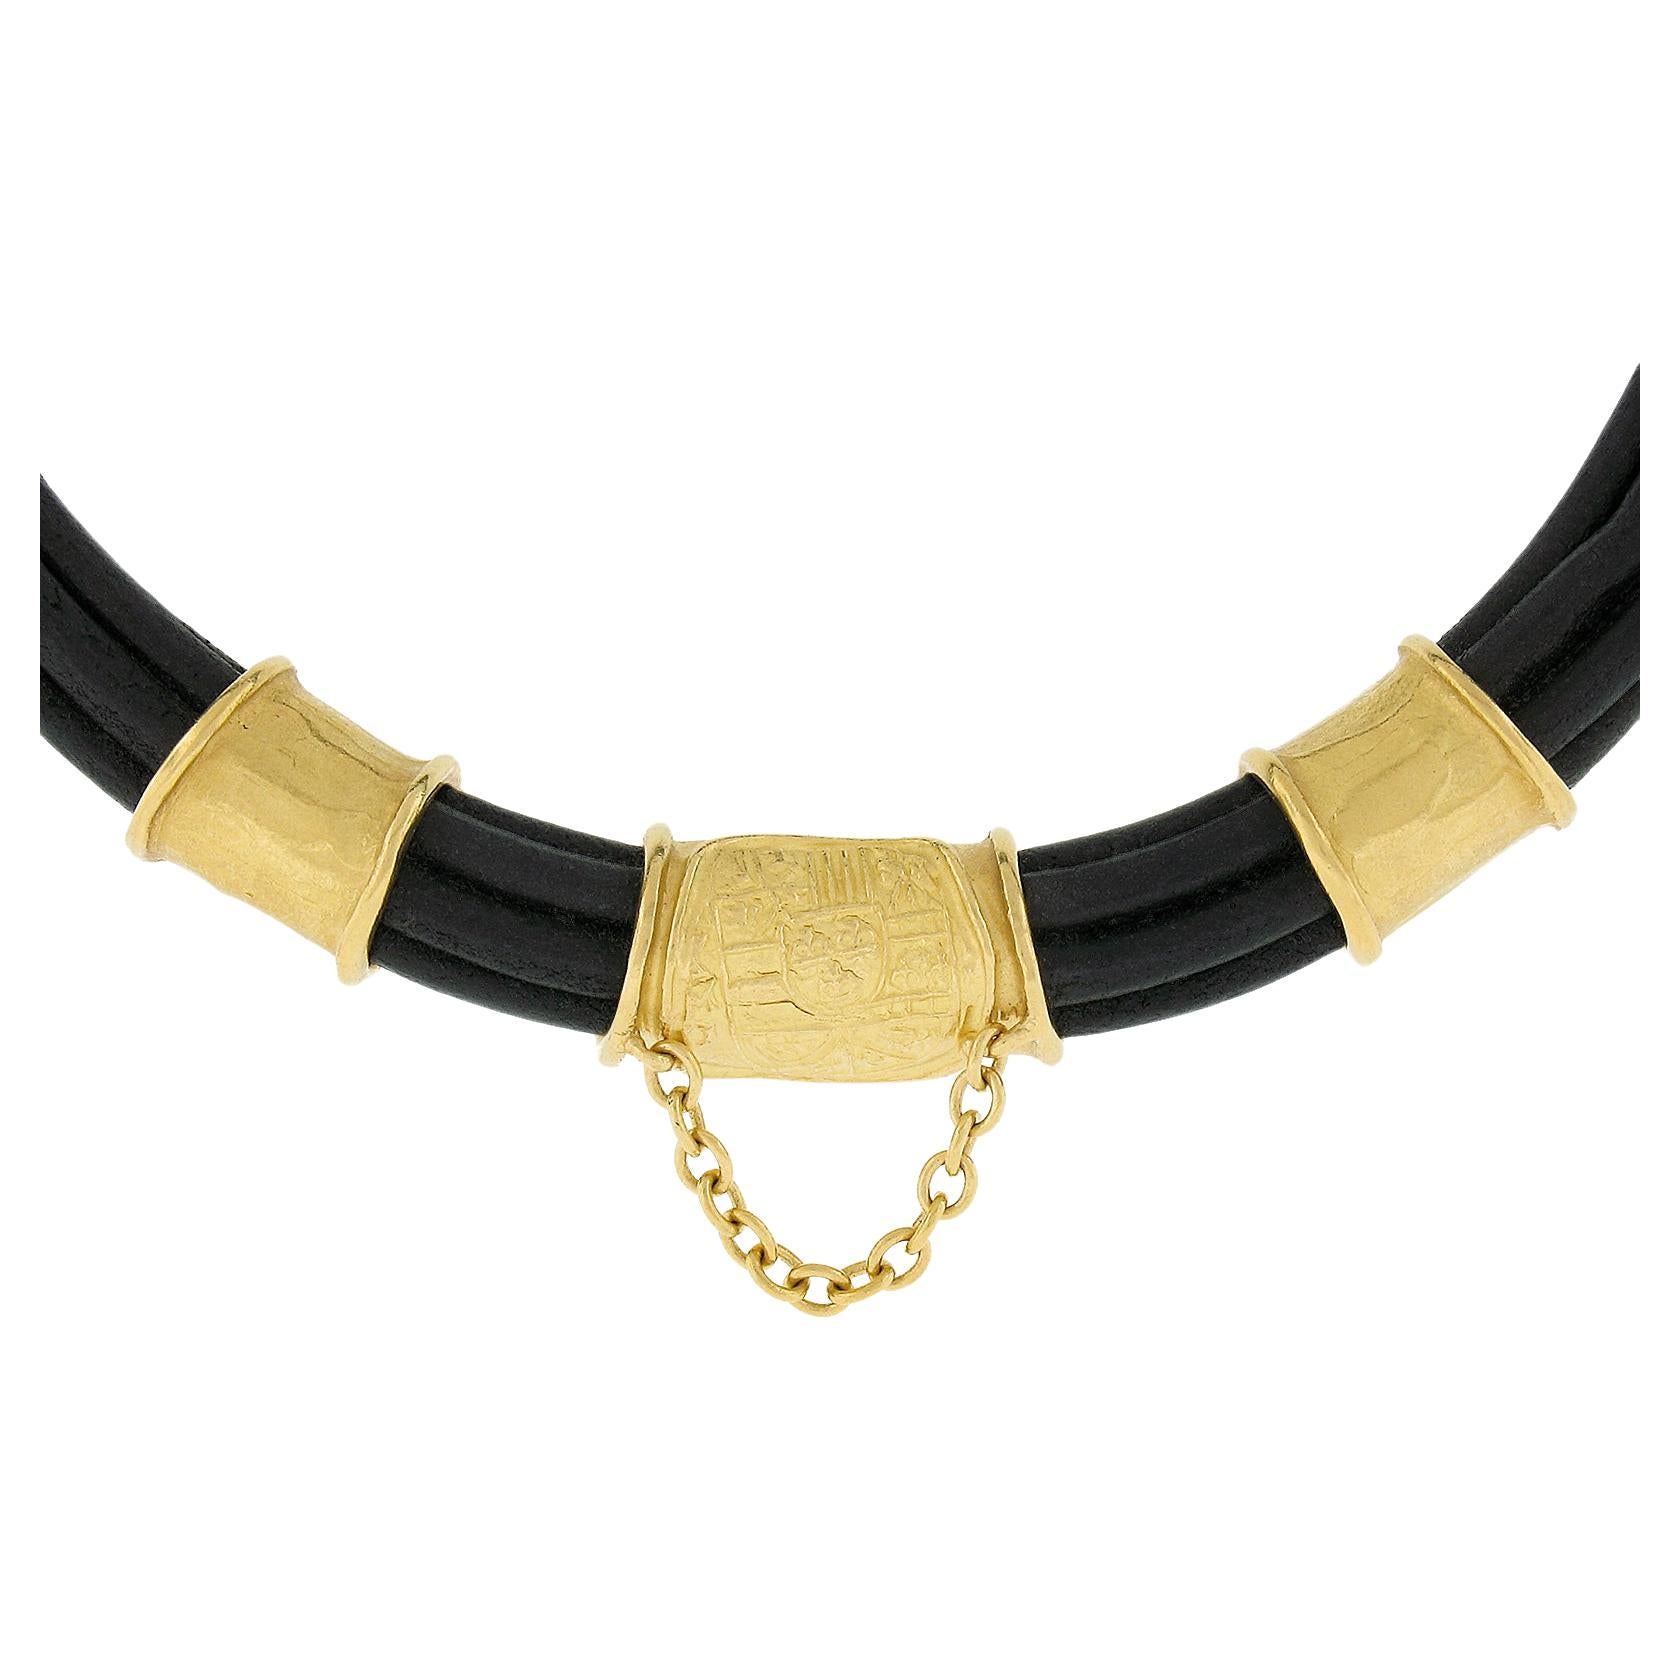 Material: Solid 22k Yellow Gold w/ Black Leather Cord
Weight: 93.6 Grams
Chain Type: Black Leather Multi Cord
Chain Length:	16 Inches (approx.)
Center Piece Width: 30.3mm (1.1